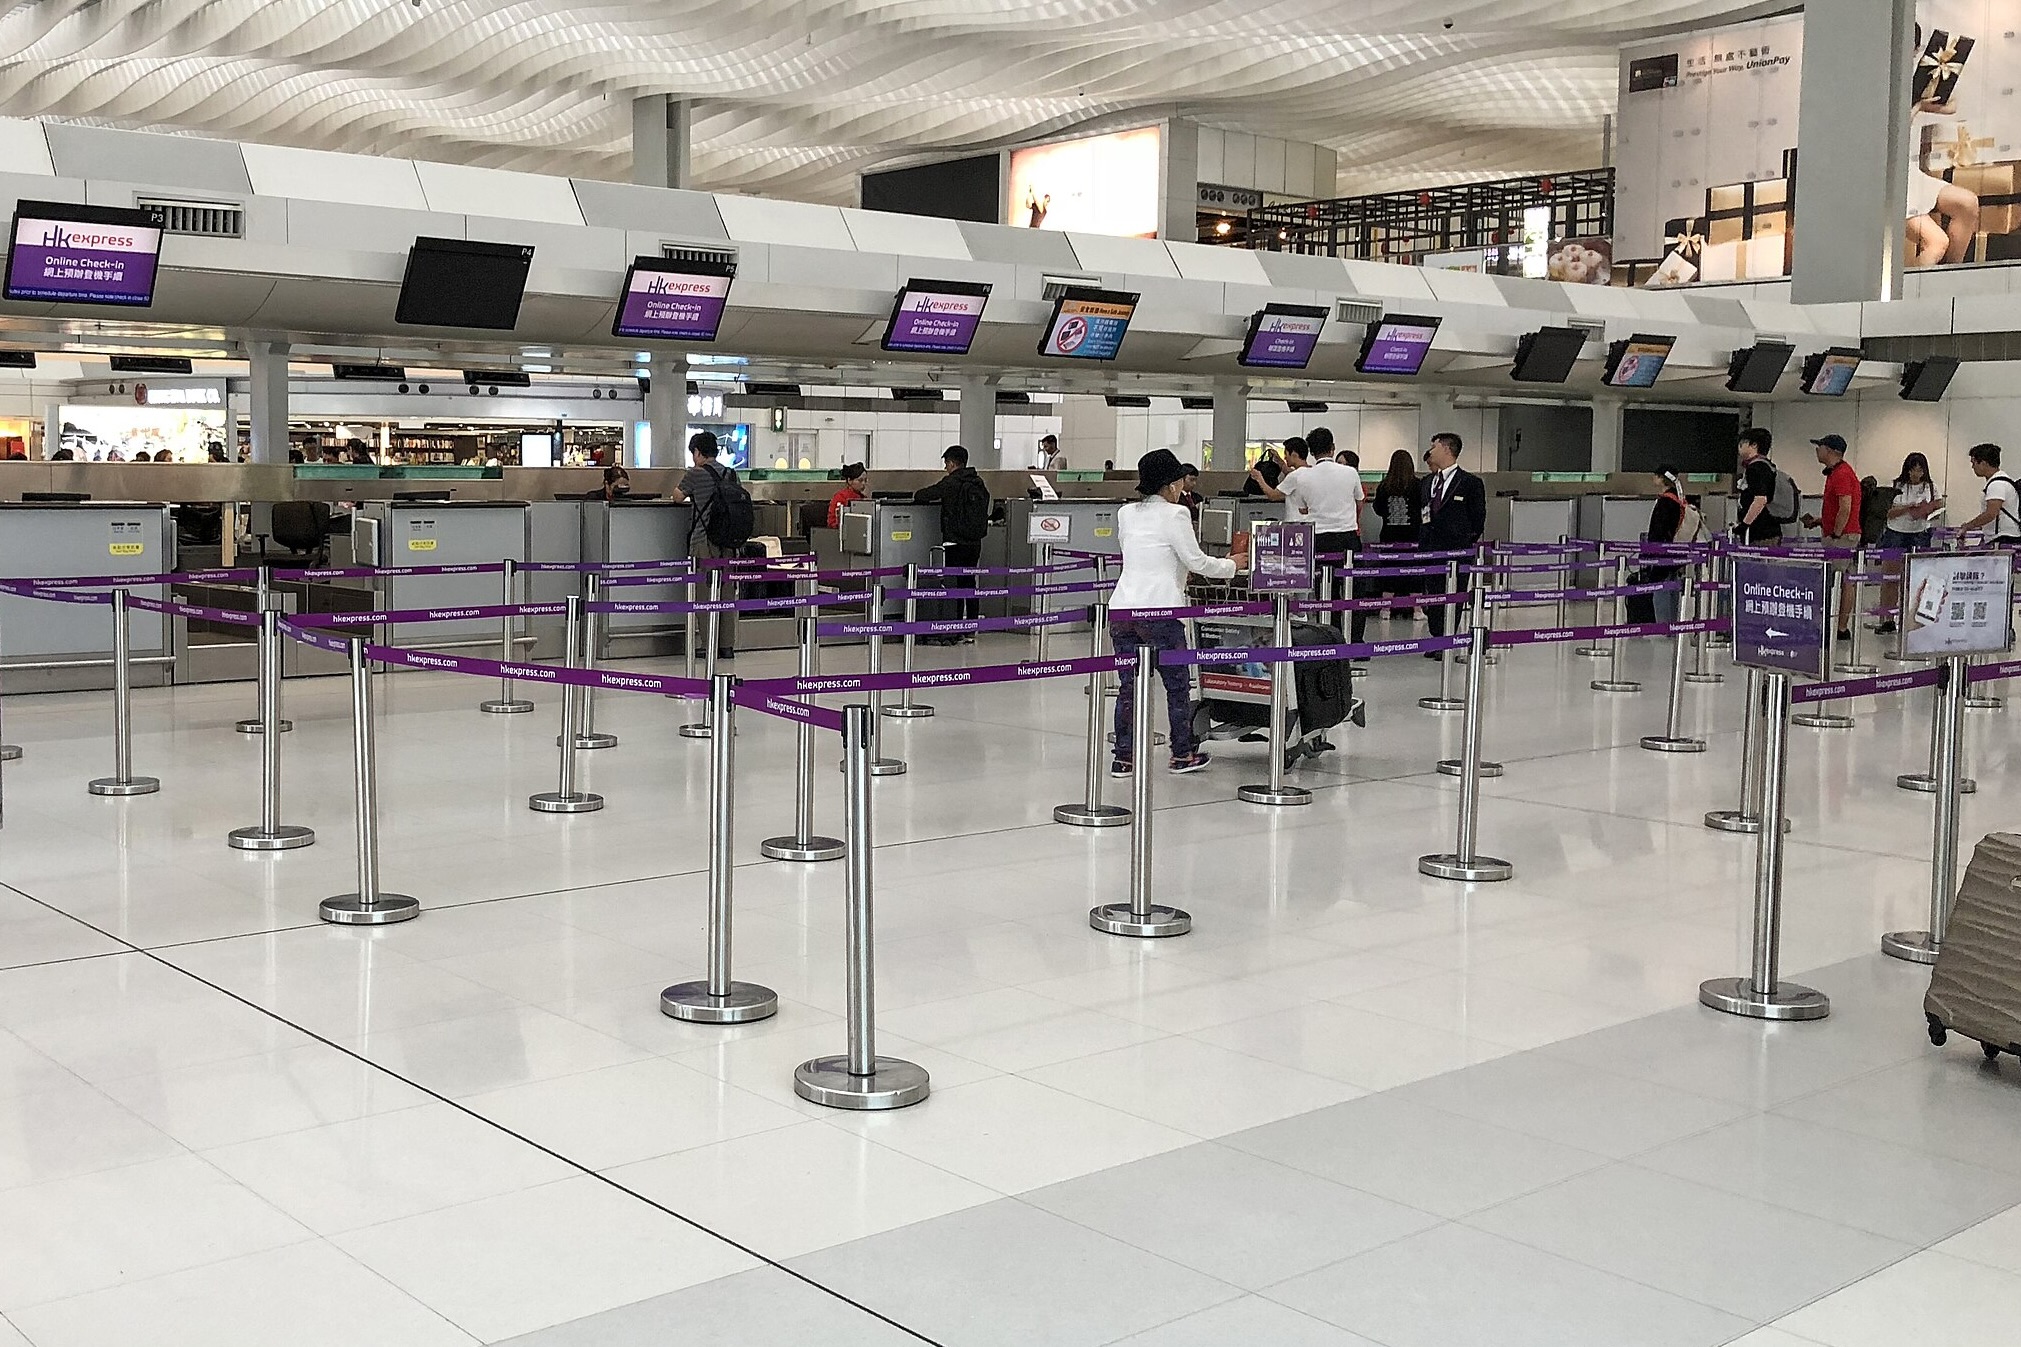 The HK Express check-in counters at Hong Kong International Airport. There are queue managers placed in front of the counters and passengers walking through them and standing in line waiting to check in,